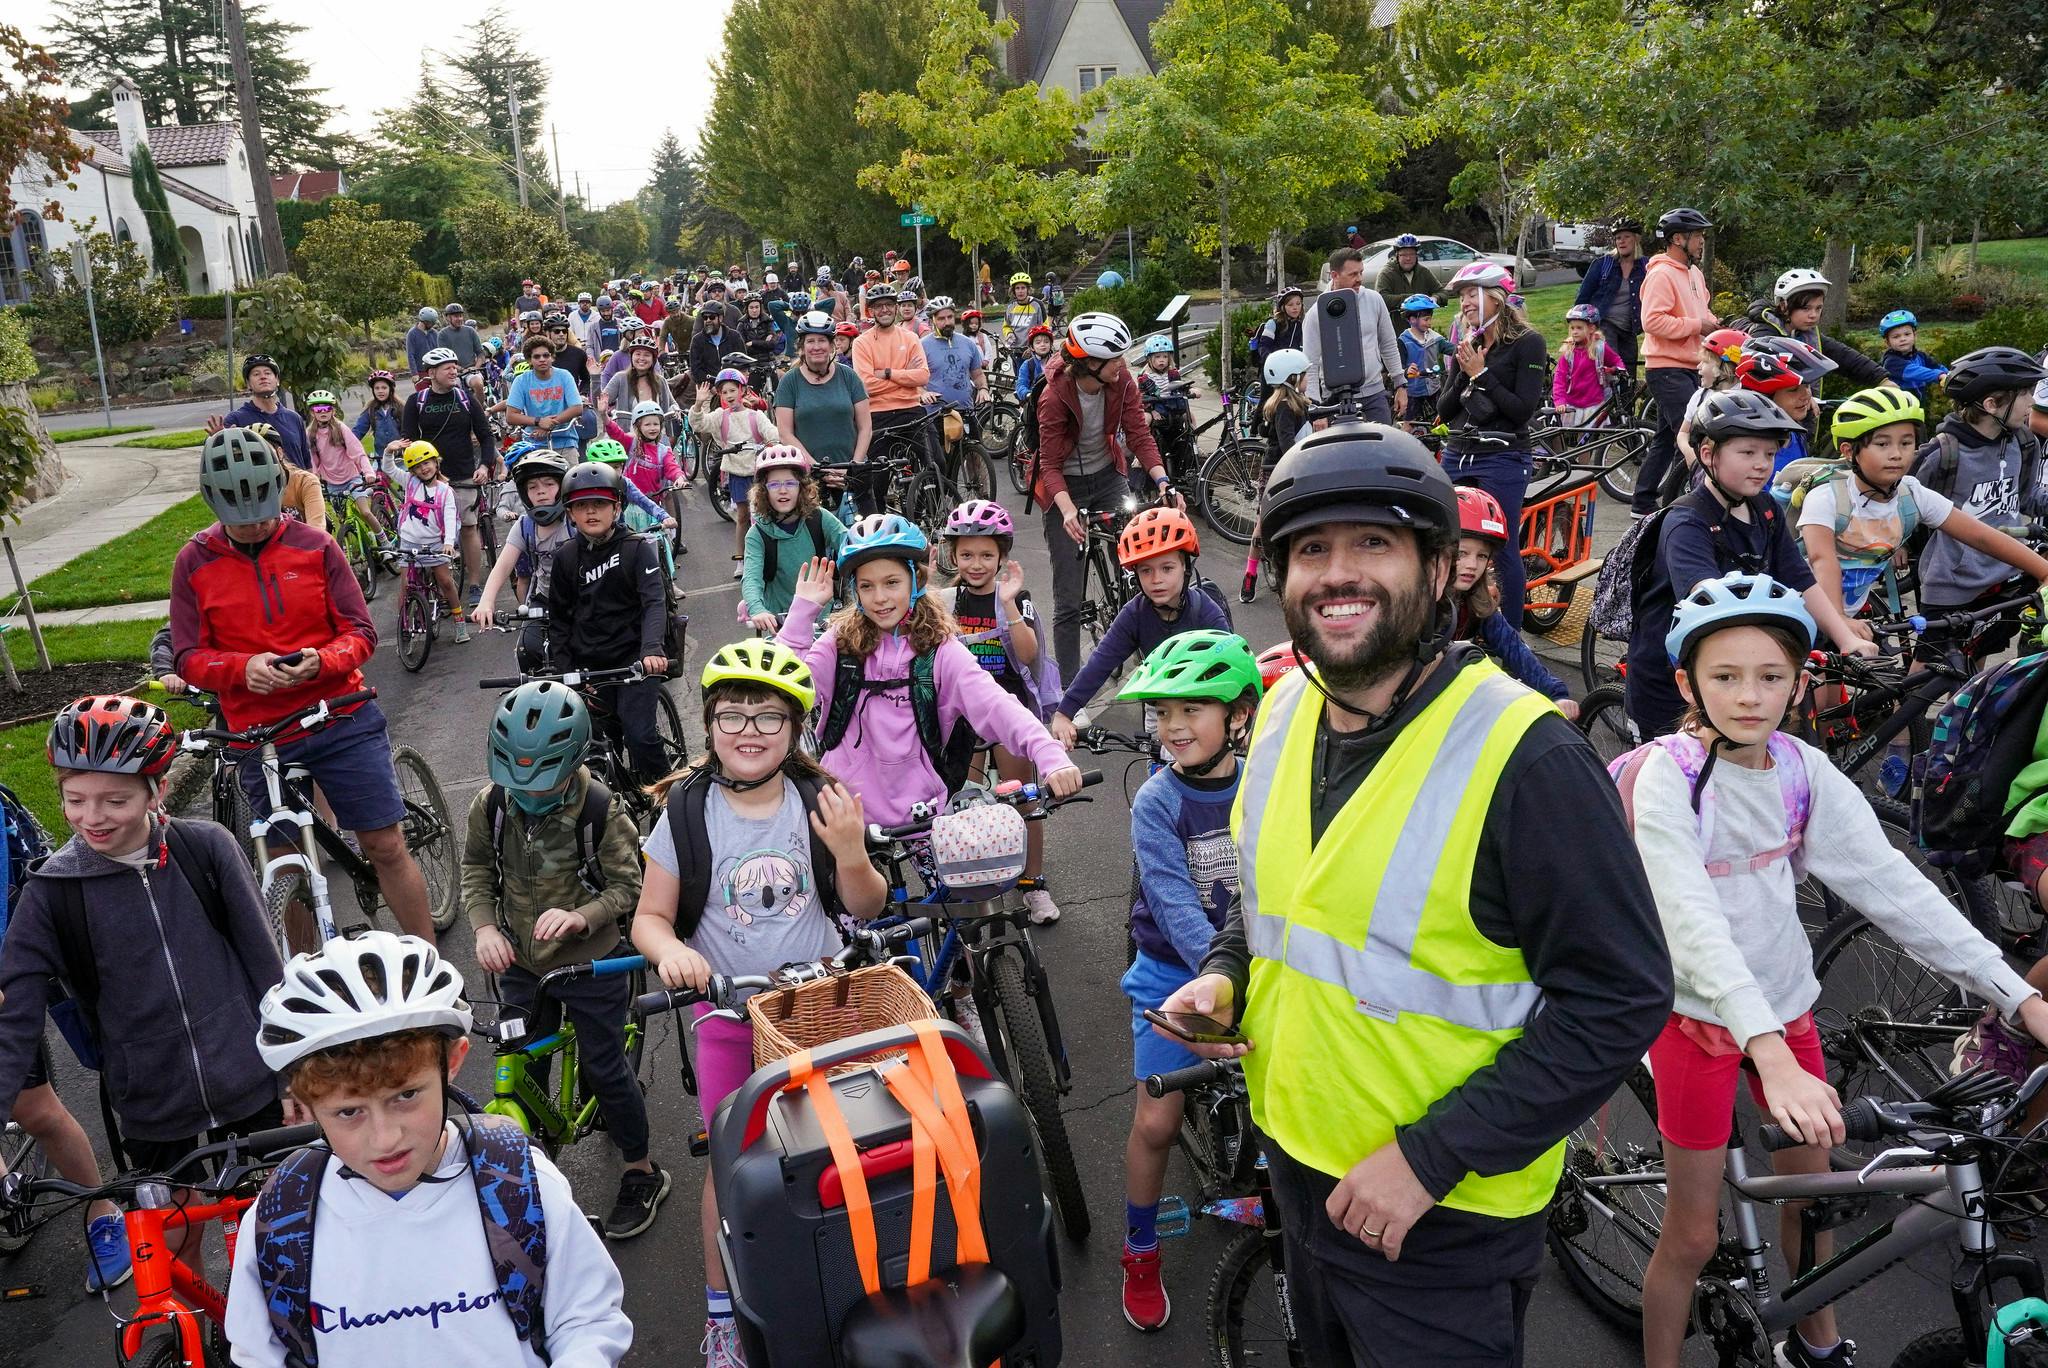 Wearing a yellow safety vest, Coach Balto leads a weekly “Bike Bus” for Alameda Elementary School students. (Photo credit: Jonathan Maus/BikePortland)